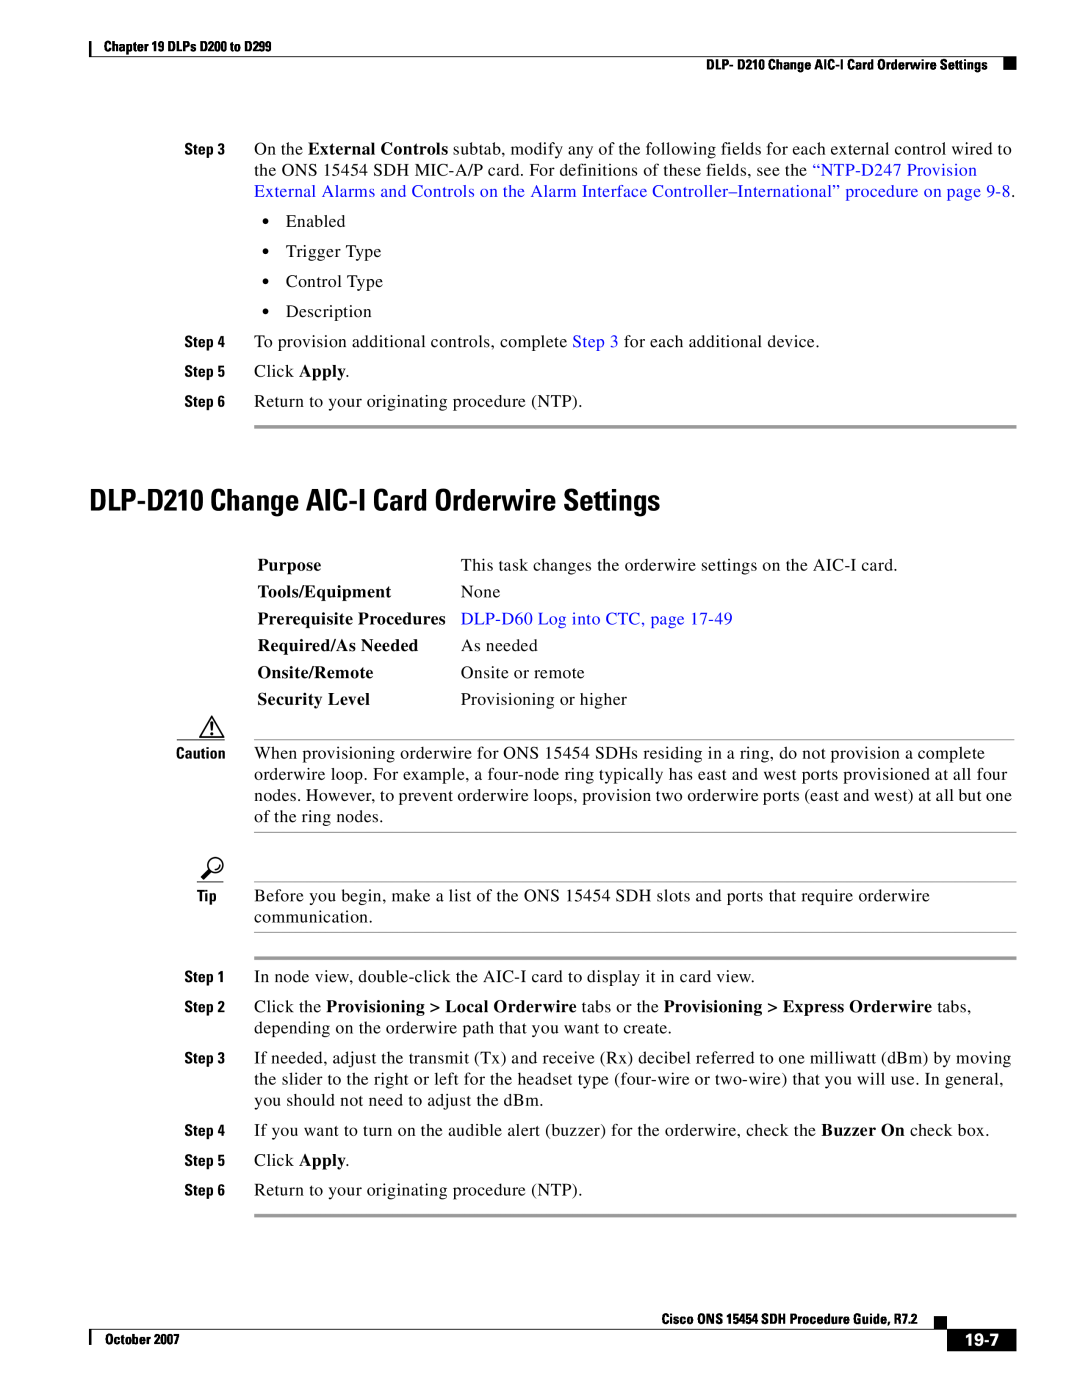 Cisco Systems D200 manual DLP-D210 Change AIC-I Card Orderwire Settings, 19-7, DLP-D60 Log into CTC, page, Click Apply 